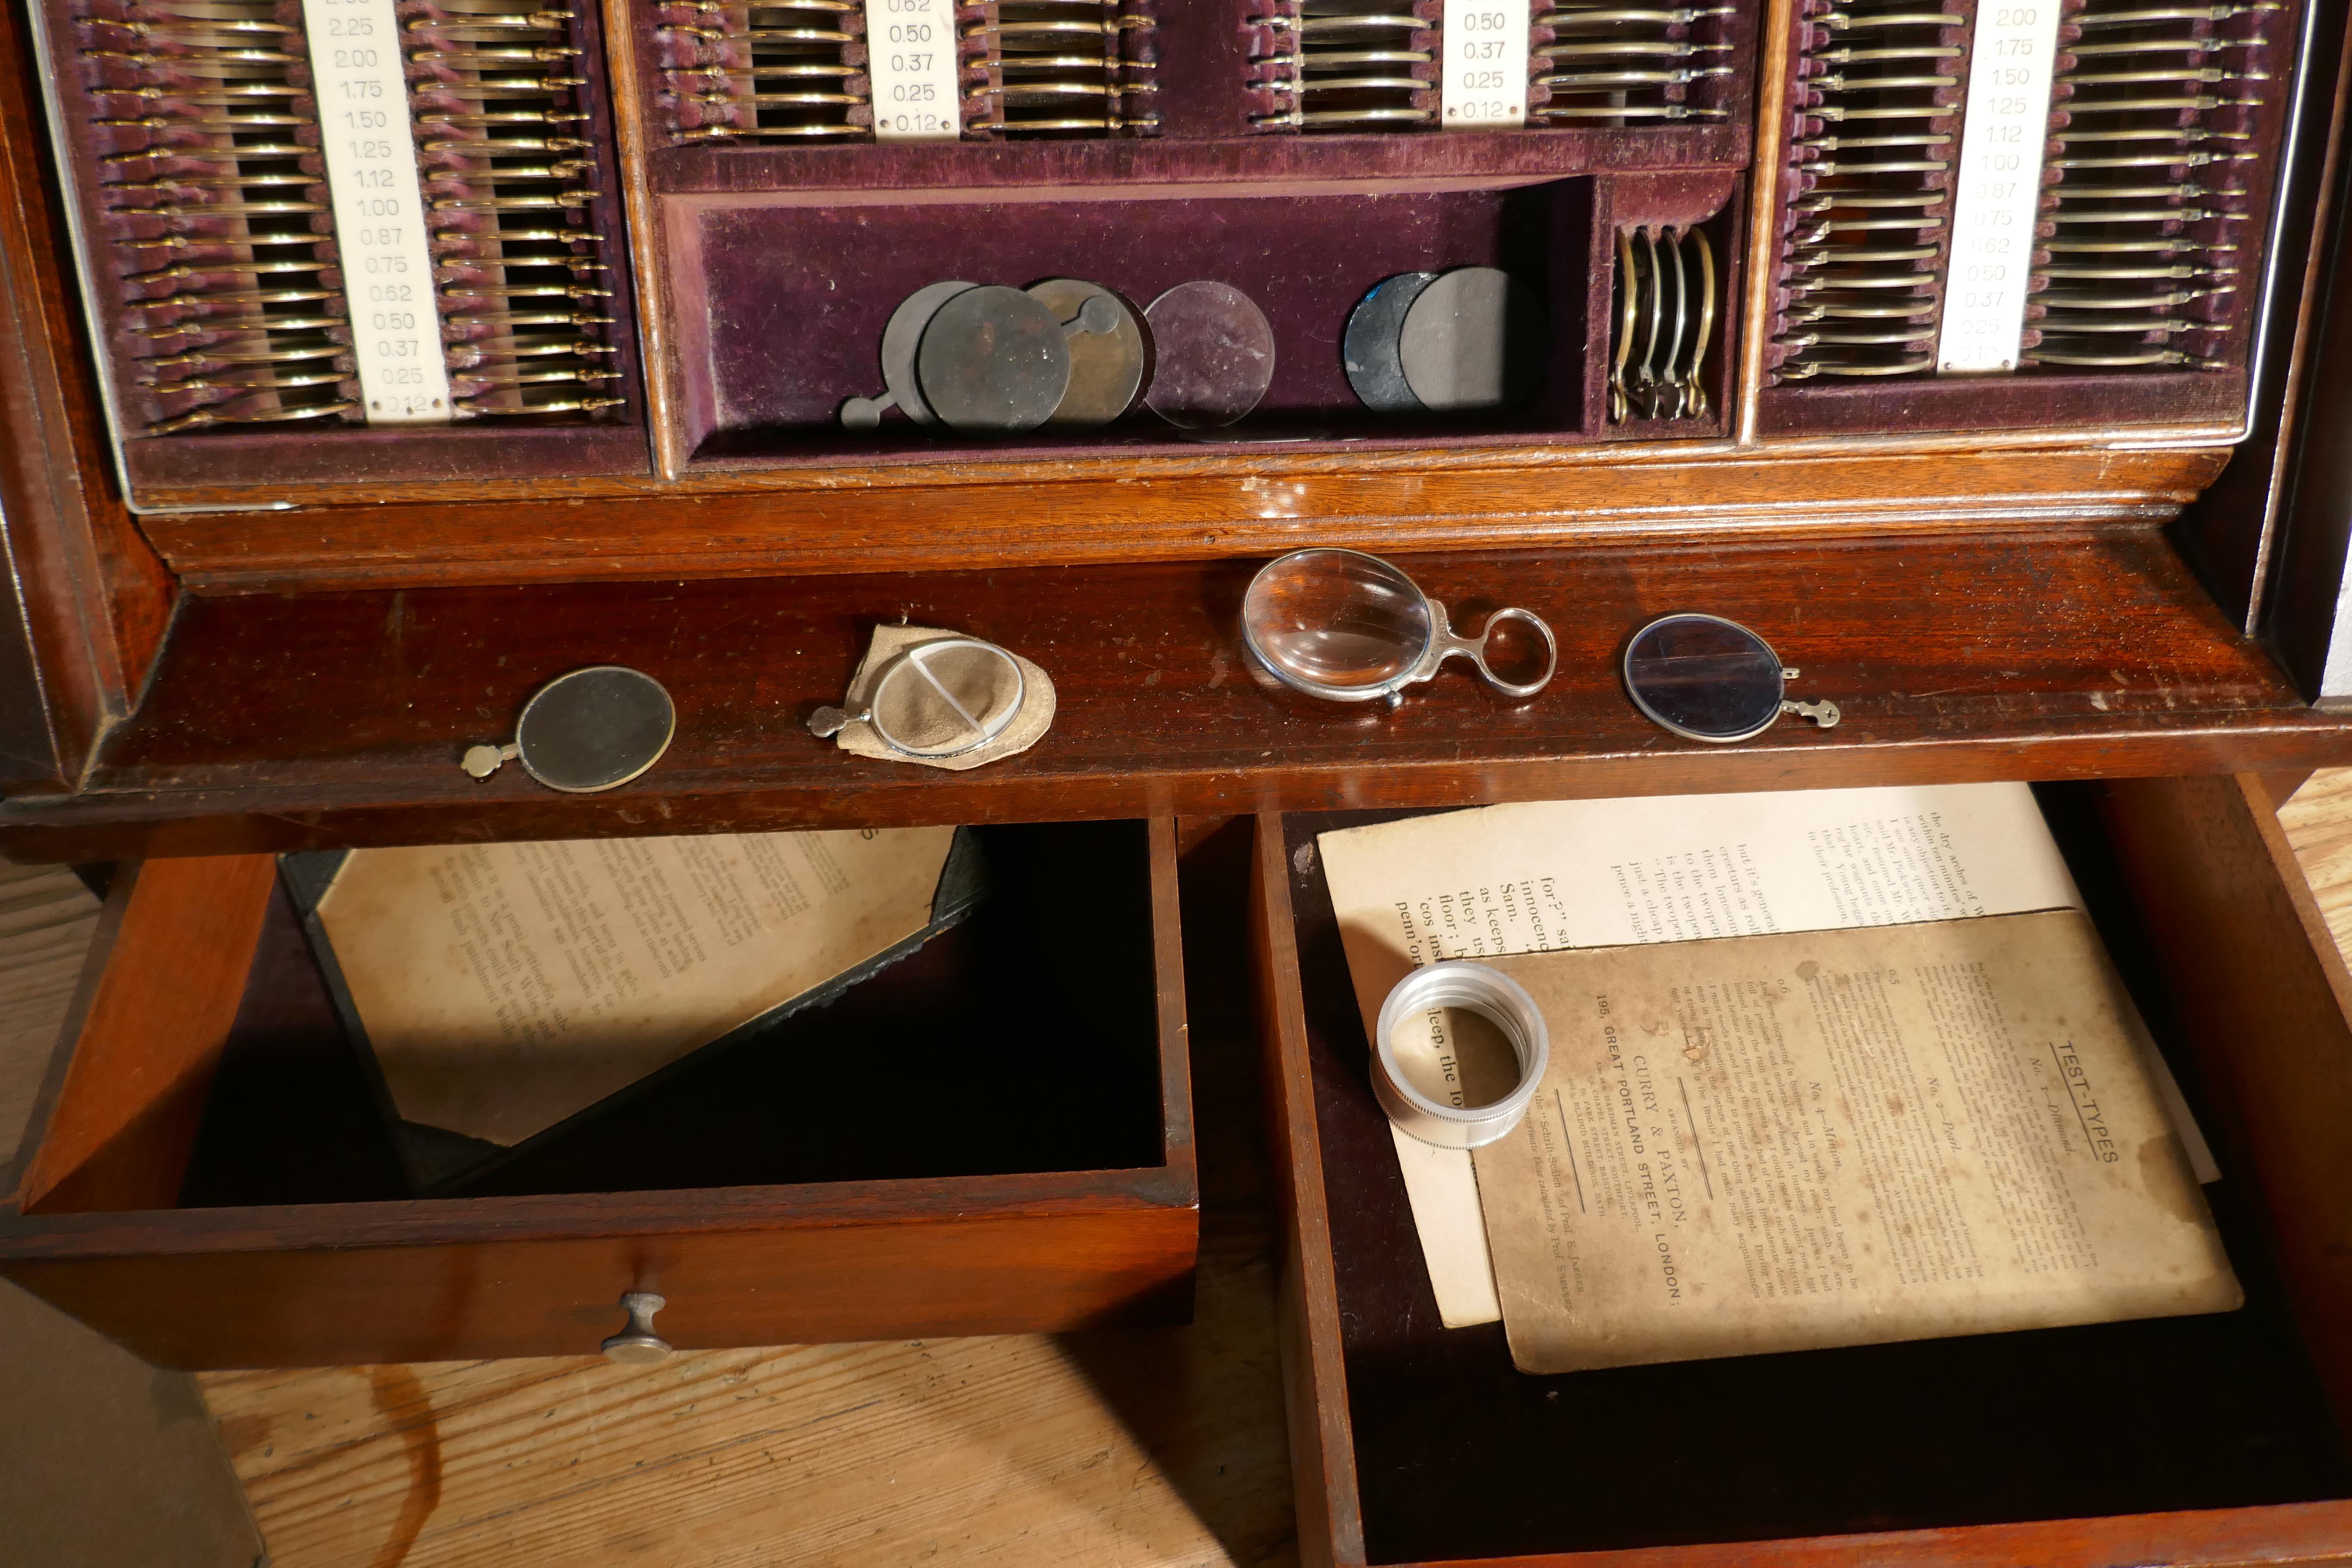 19th Century Optician or Optometrist Test Glasses Lens Kit in Cabinet 

This beautiful Mahogany cabinet was used by a traveling optometrists to treat patients in their homes.  
The glass front lifts up and slides down inside the cabinet on a